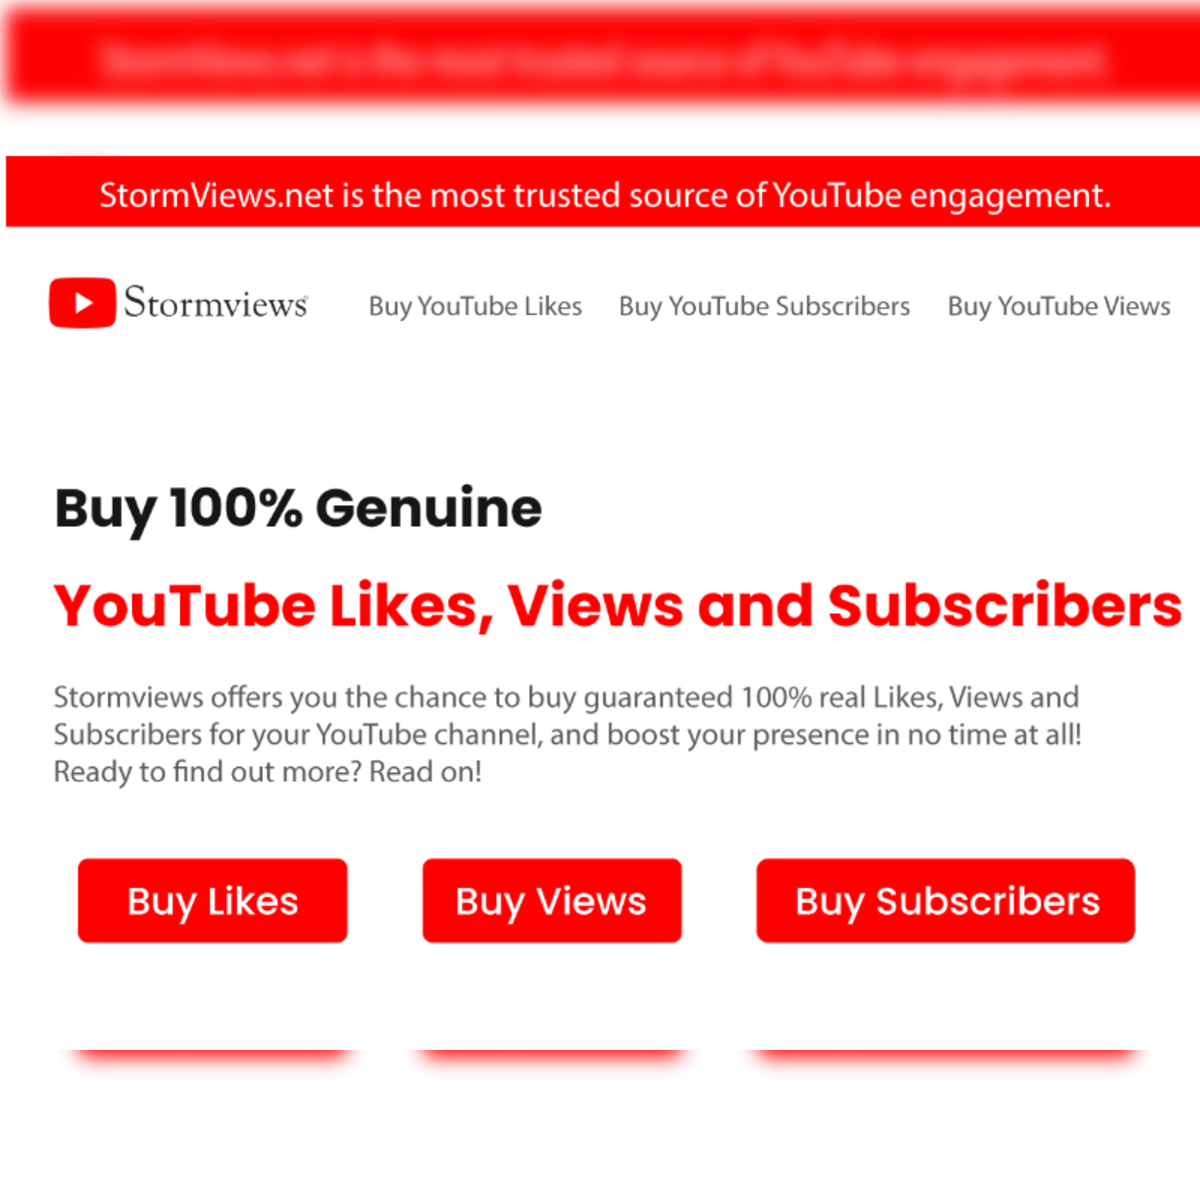 15 Best Sites to Buy YouTube Views, Likes, and Subscribers - The Economic Times